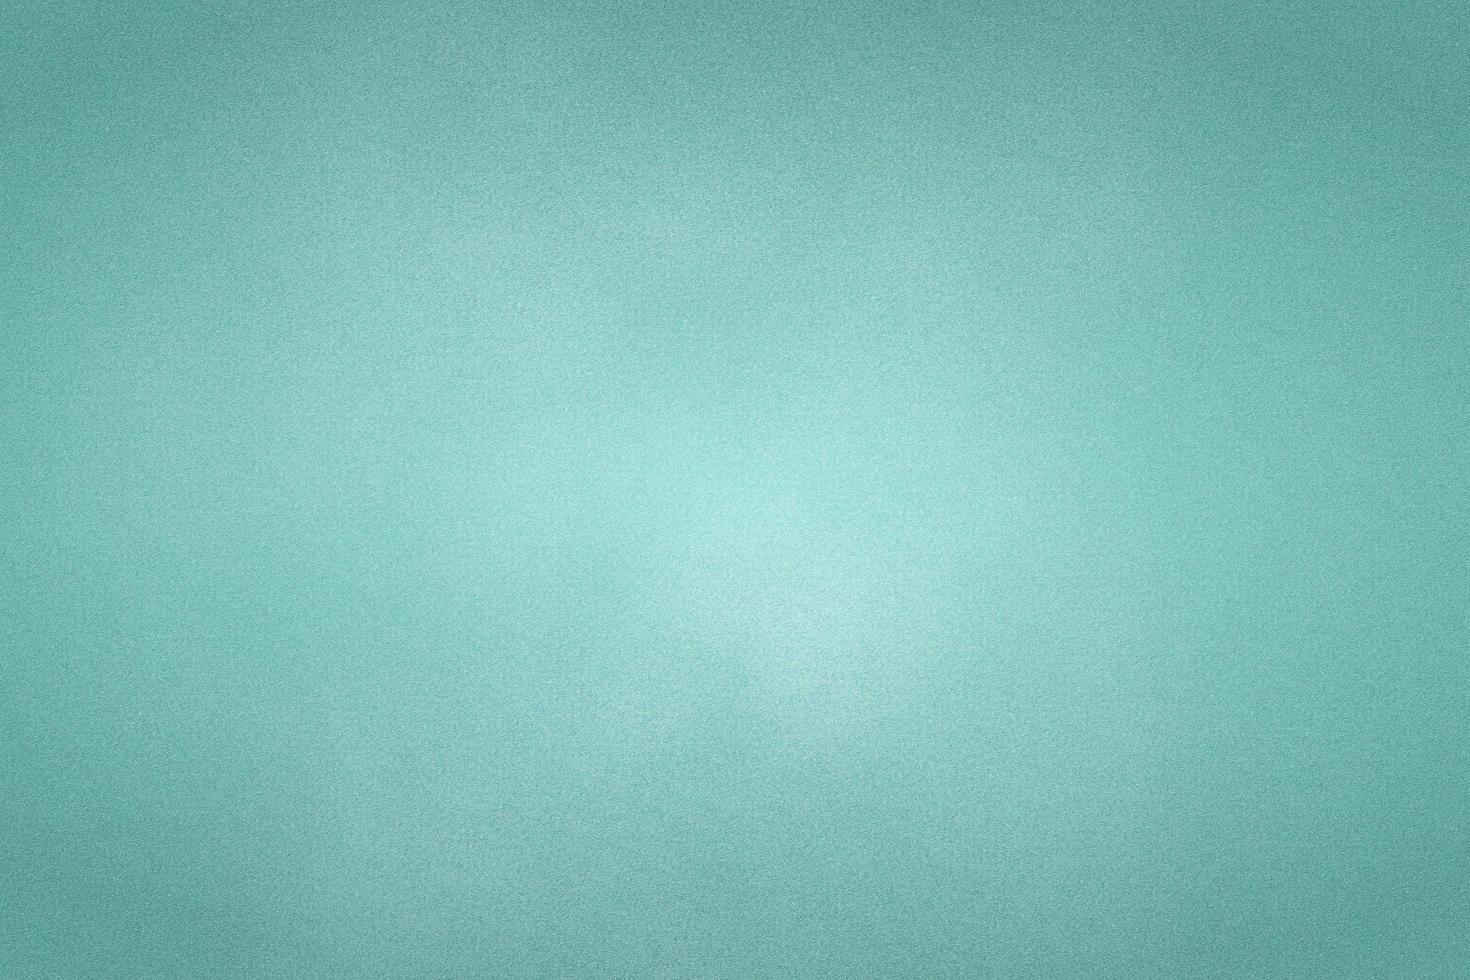 Texture of old light green paper, texture background photo